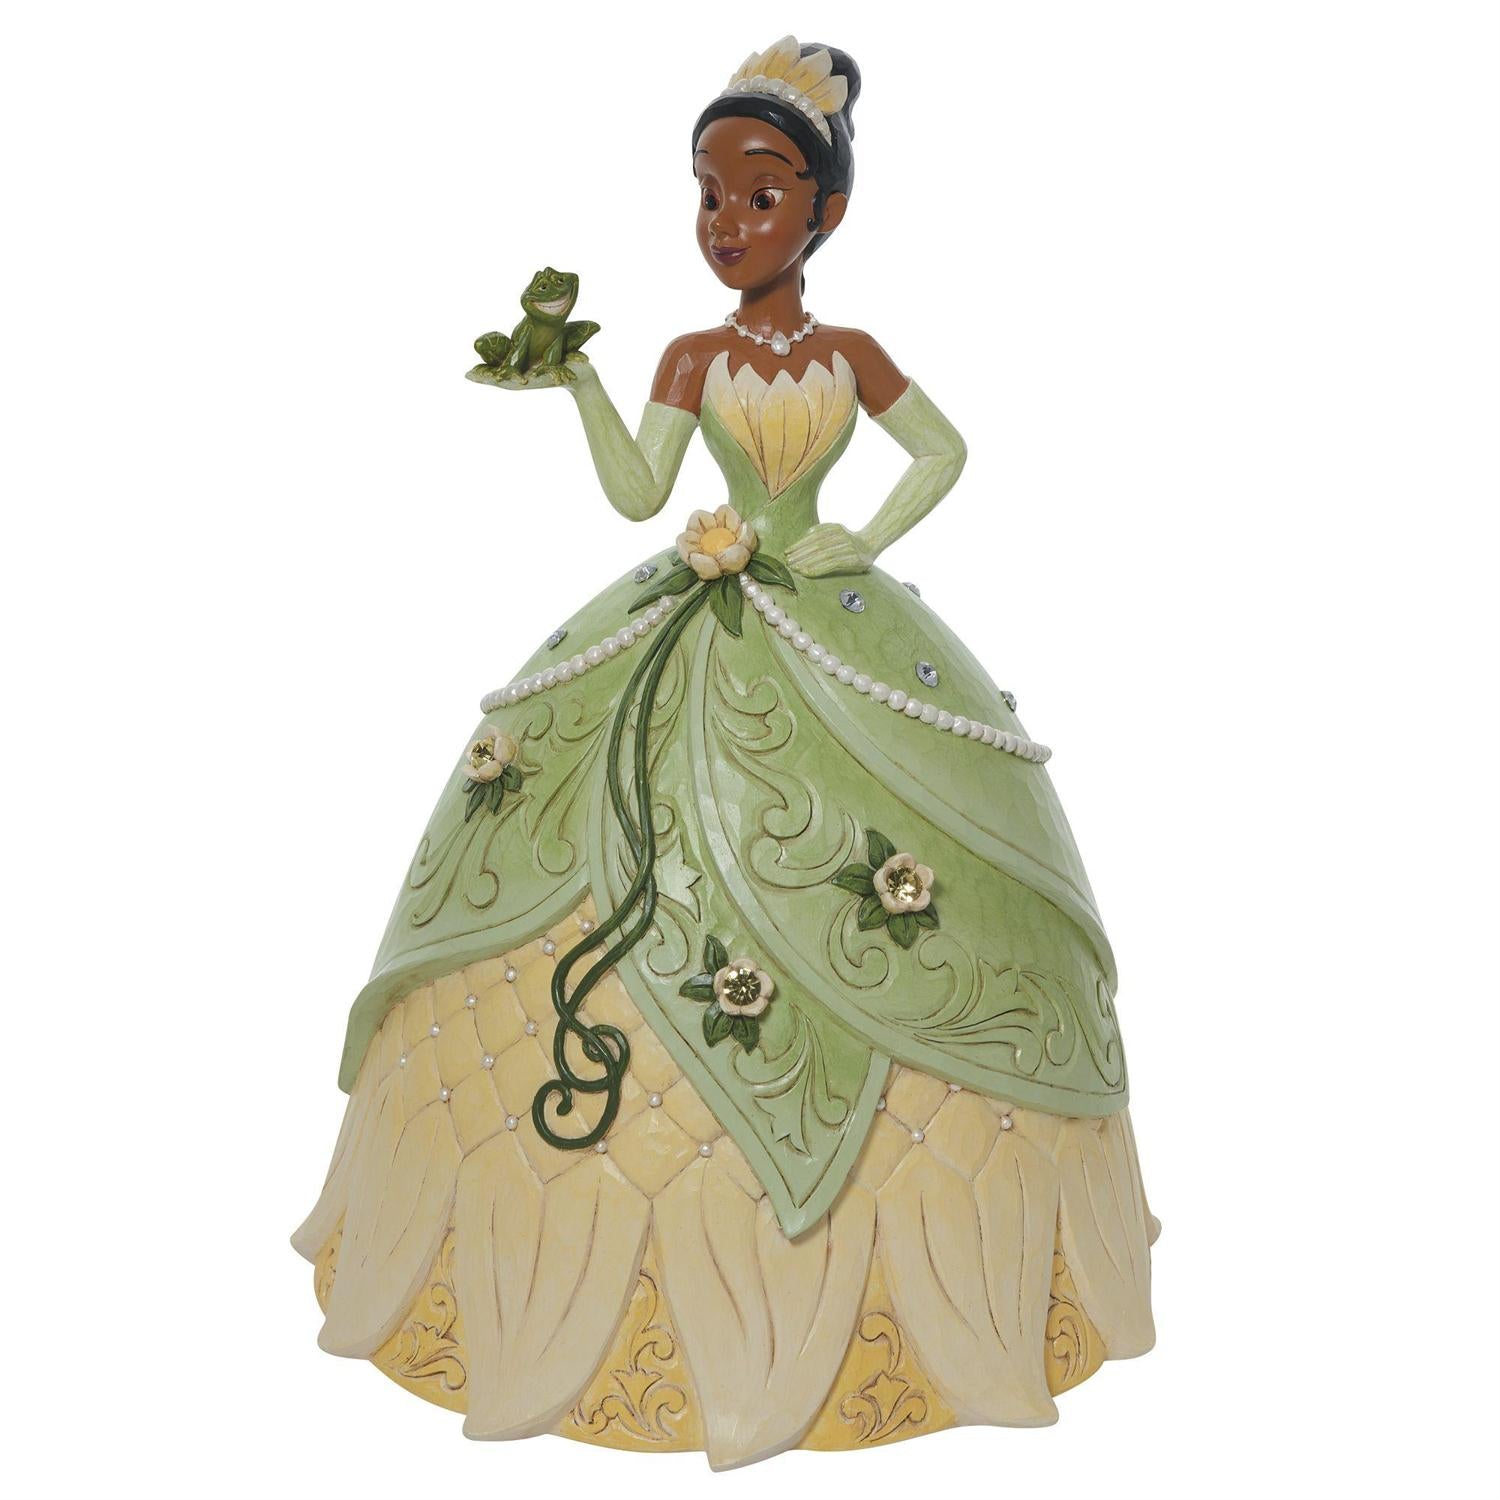 Tiana holds her soon-to-be prince, the frog, in a spectacular floral dress and tiara.